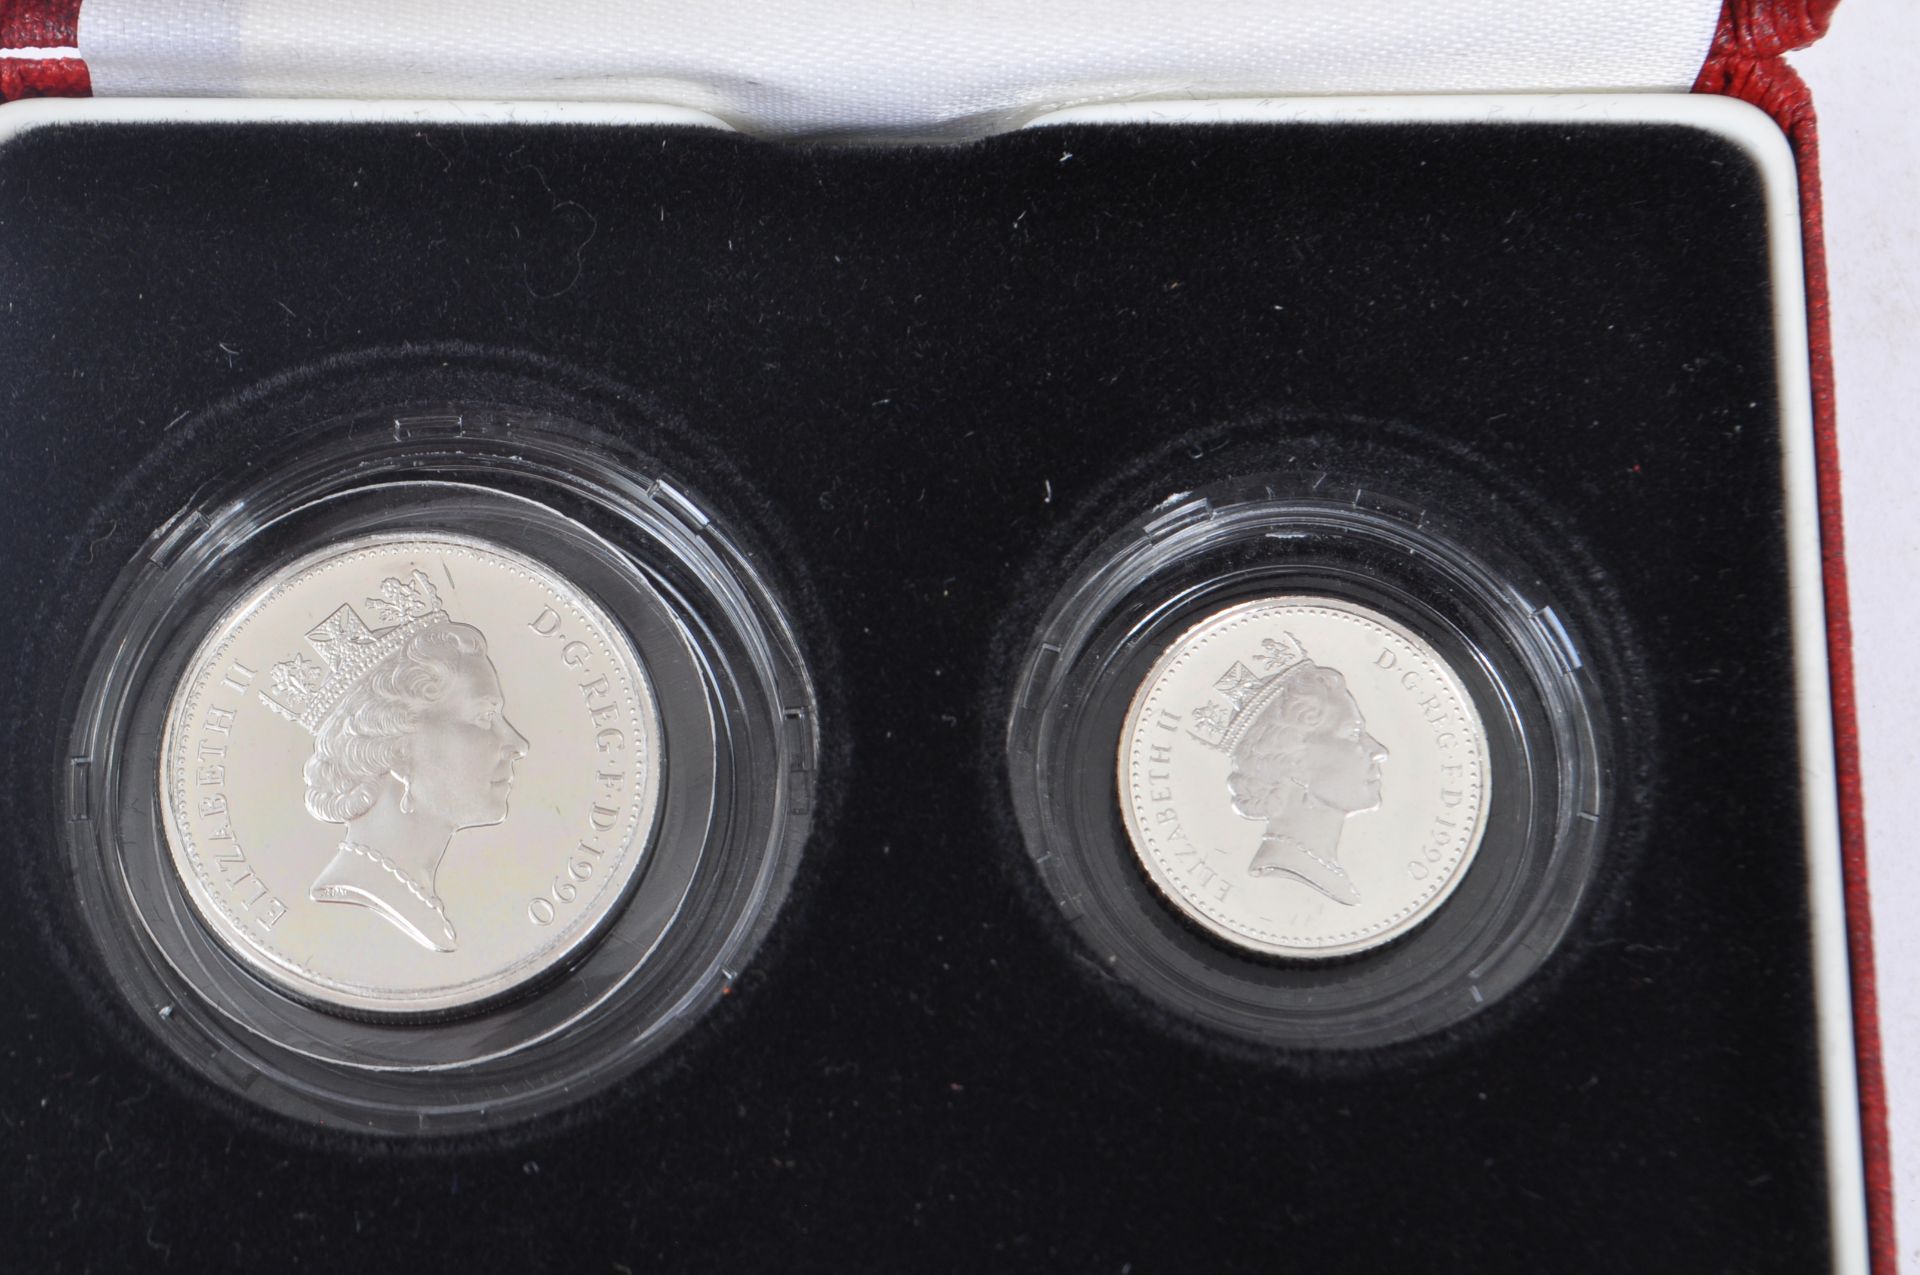 THE ROYAL MINT - UNITED KINGDOM - GROUP OF SILVER PROOF COINS - Image 3 of 9